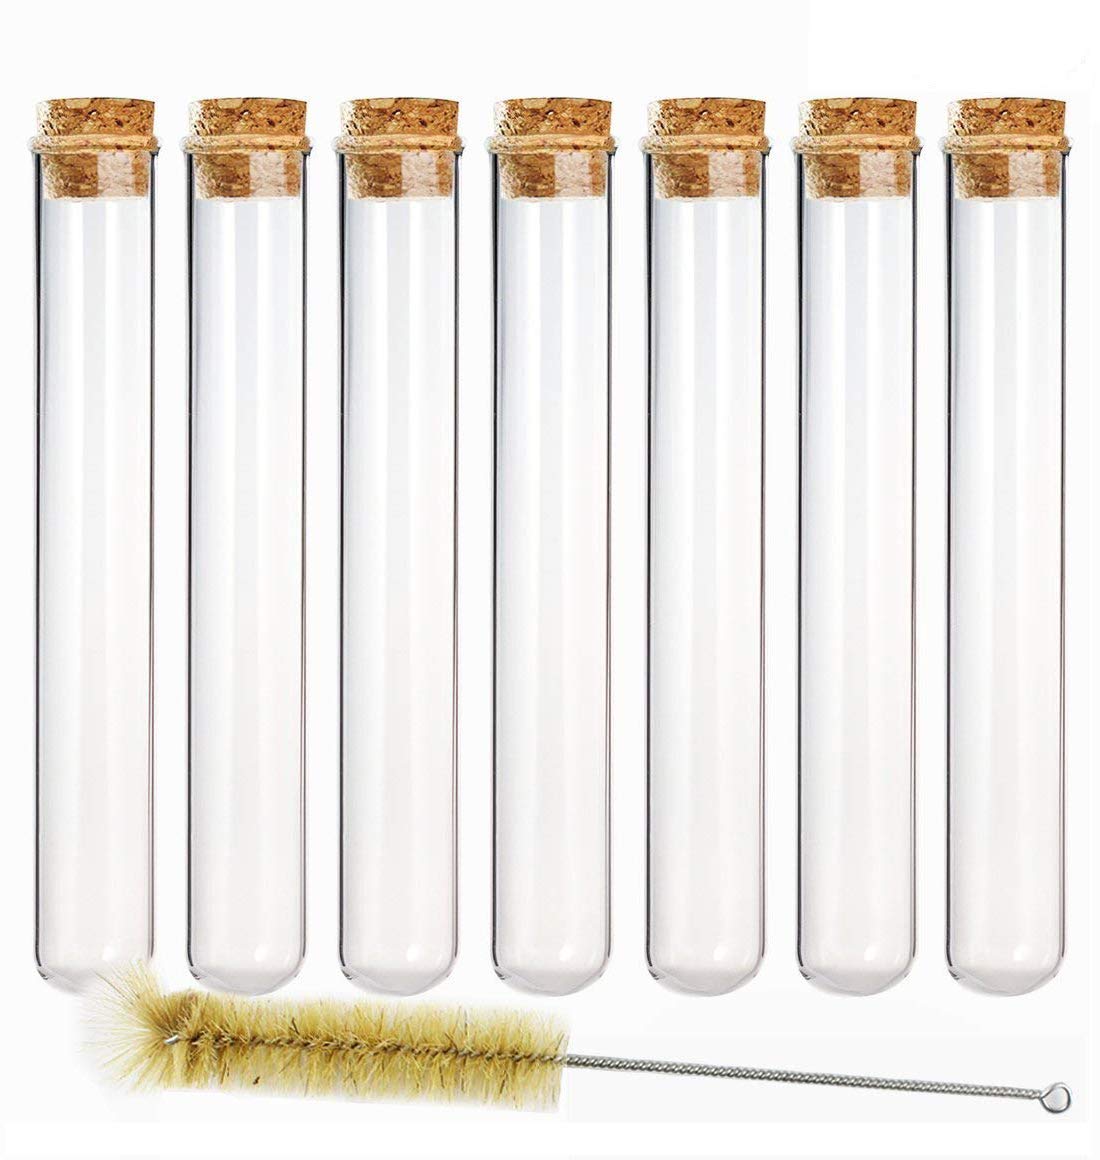 What Do We Use Test Tube Brush For